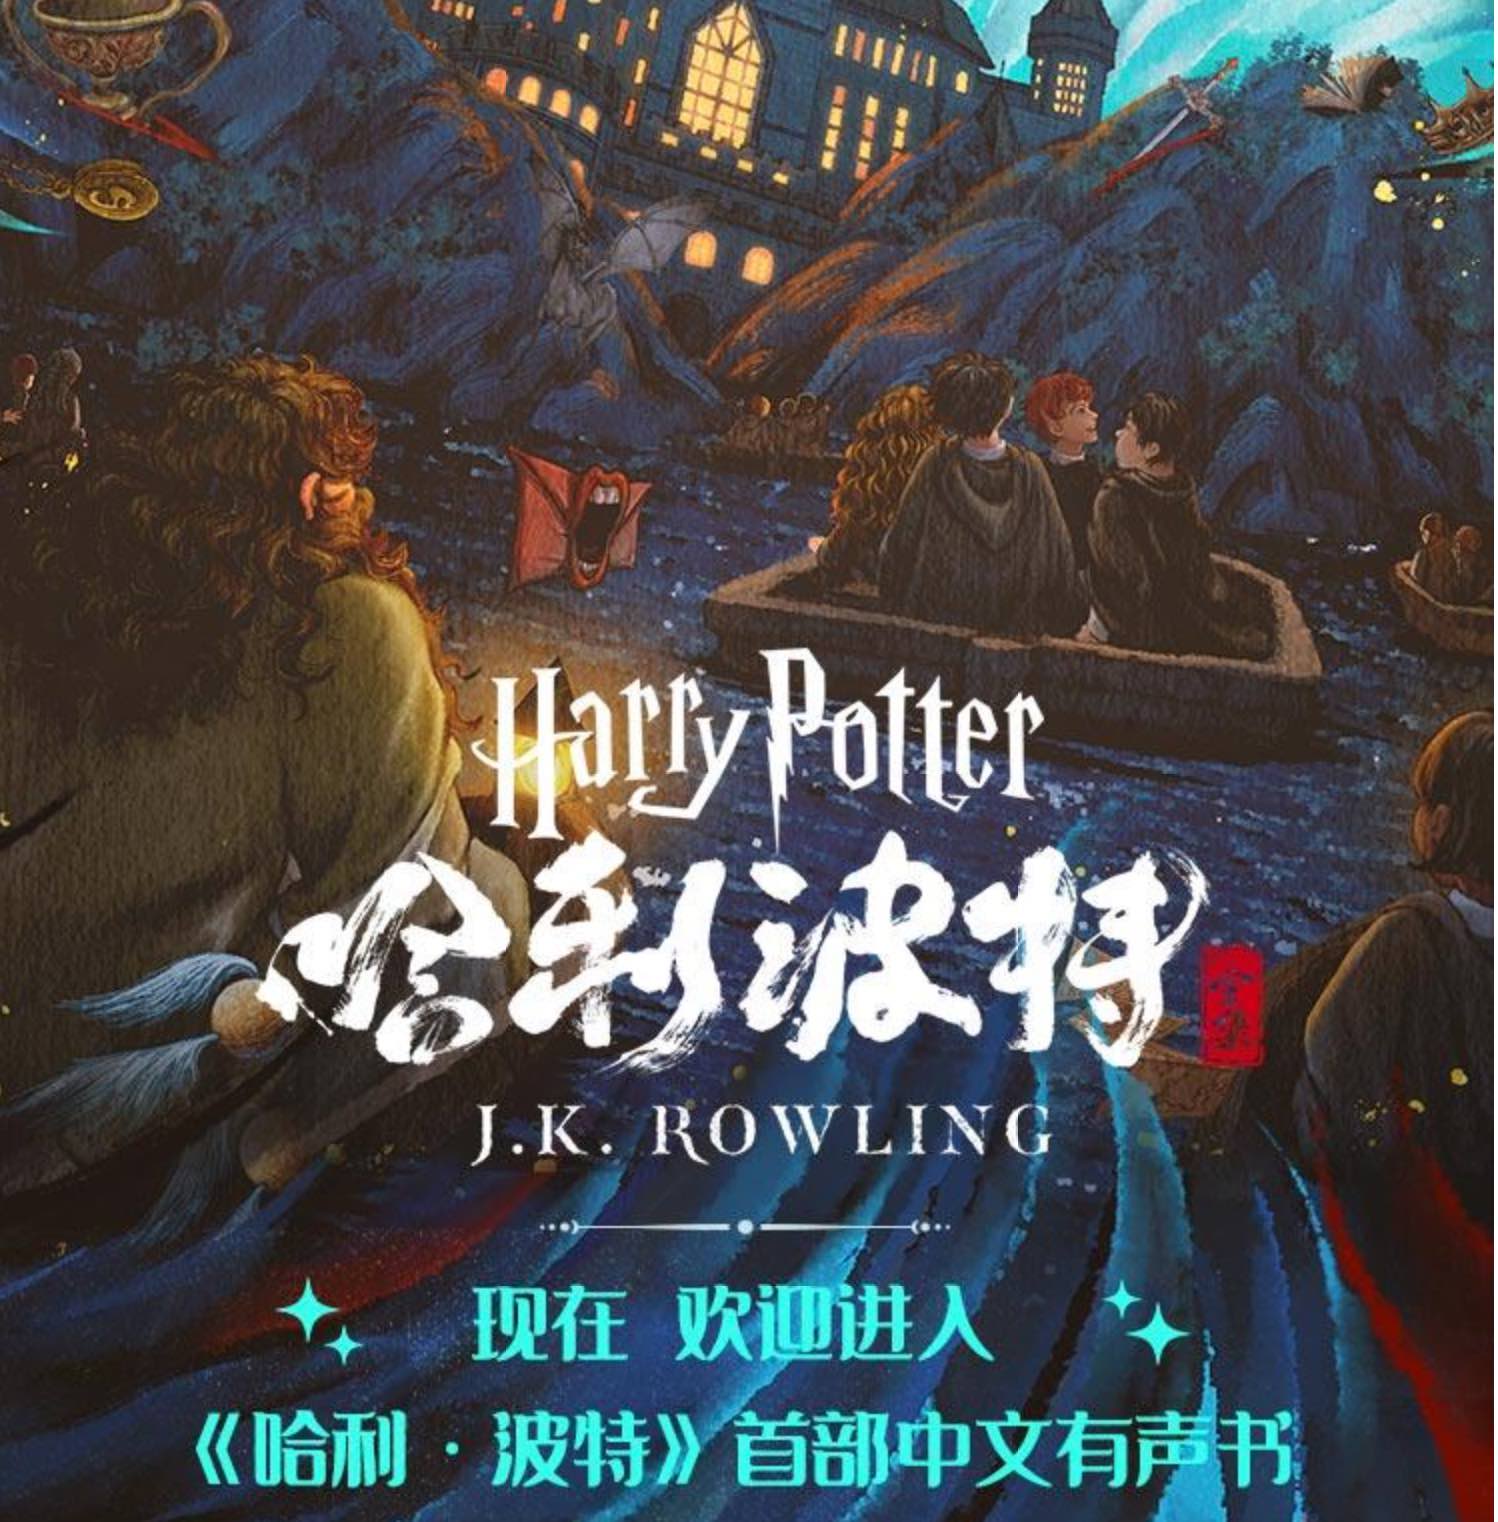 Are the Harry Potter audiobooks available in multiple languages?